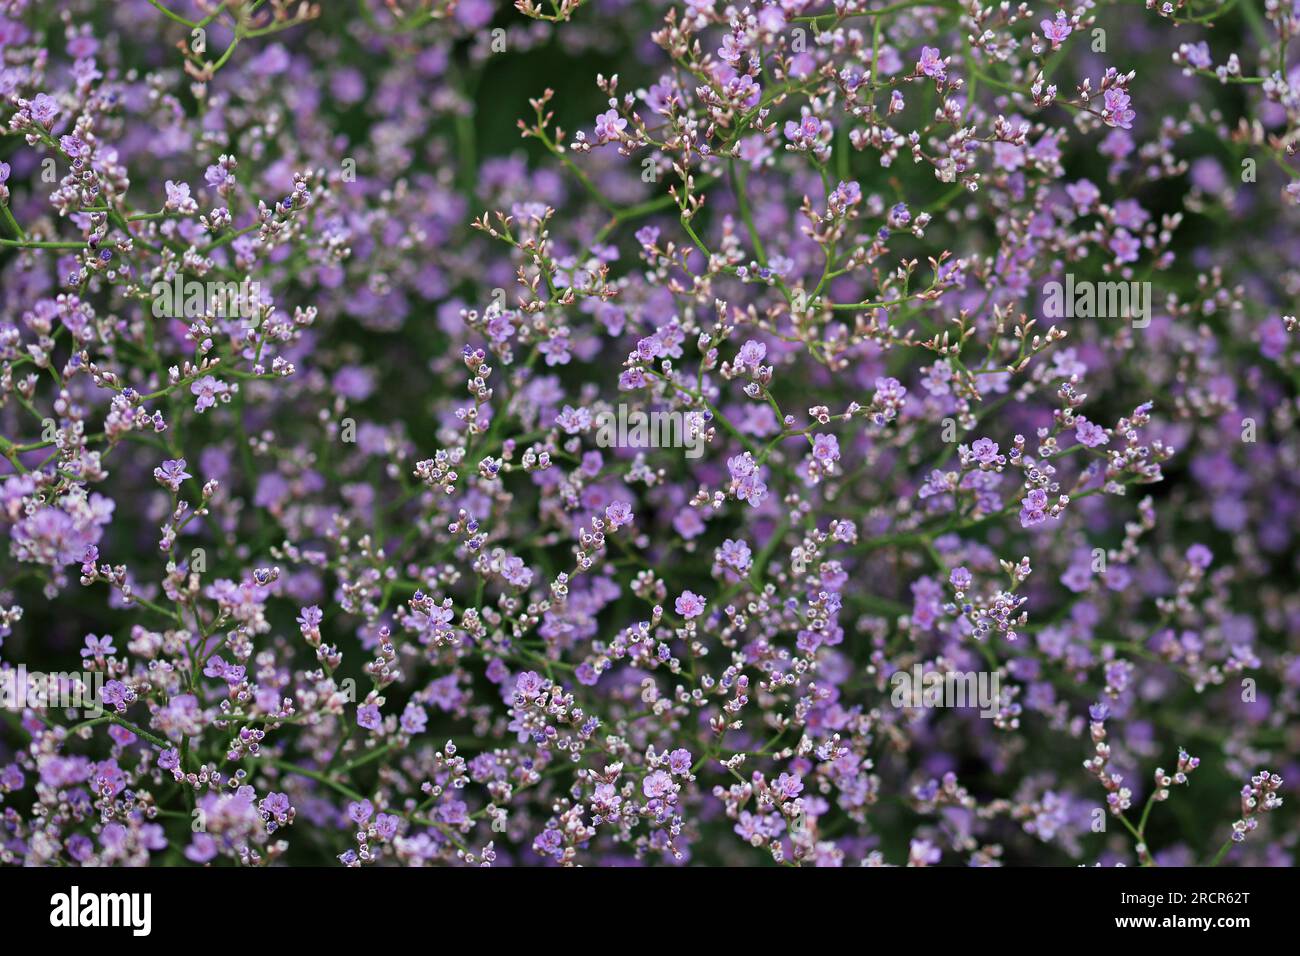 Sea lavender, Limonium platyphyllum, purple flowers in close up with a background of blurred leaves and flowers. Stock Photo